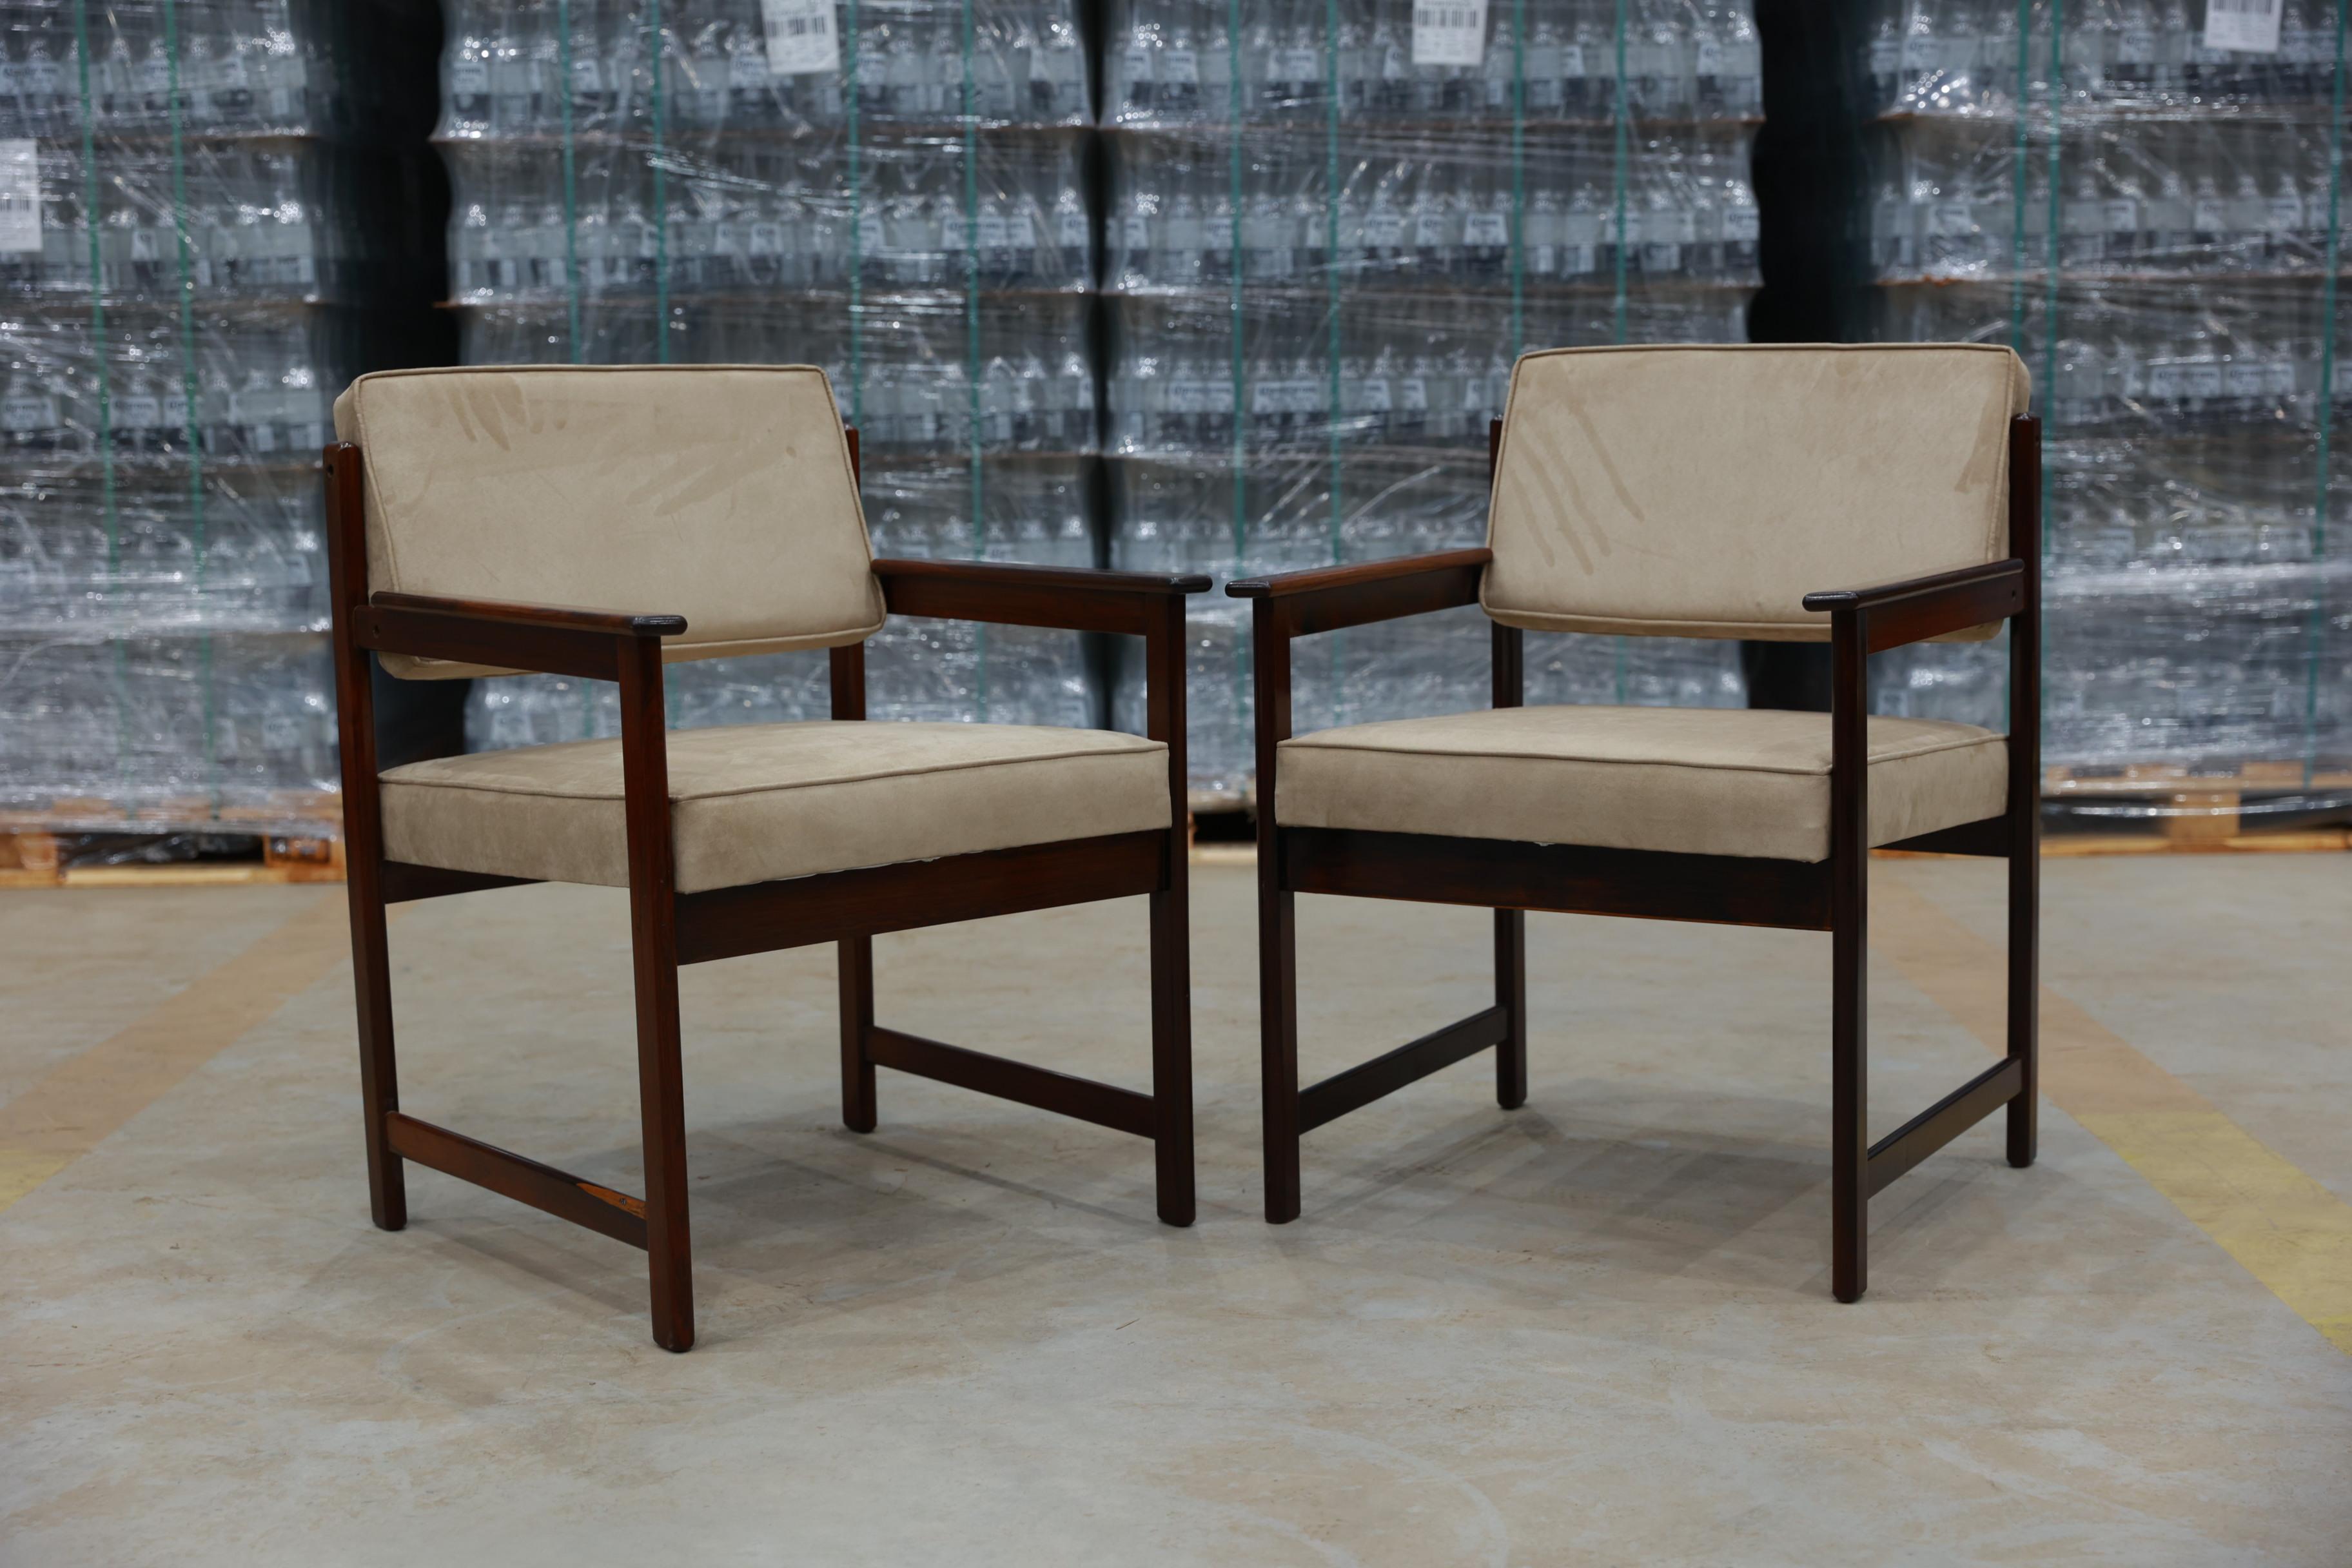 Available now, these Brazilian Modern armchairs in hardwood & beigeF Fabric designed  by Jorge Jabour for Moveis Cantu are gorgeous!

These gems were designed by Jorge Jabour Mauad and executed by Cantù Móveis e Interiores Ltda. in the 1960s. The